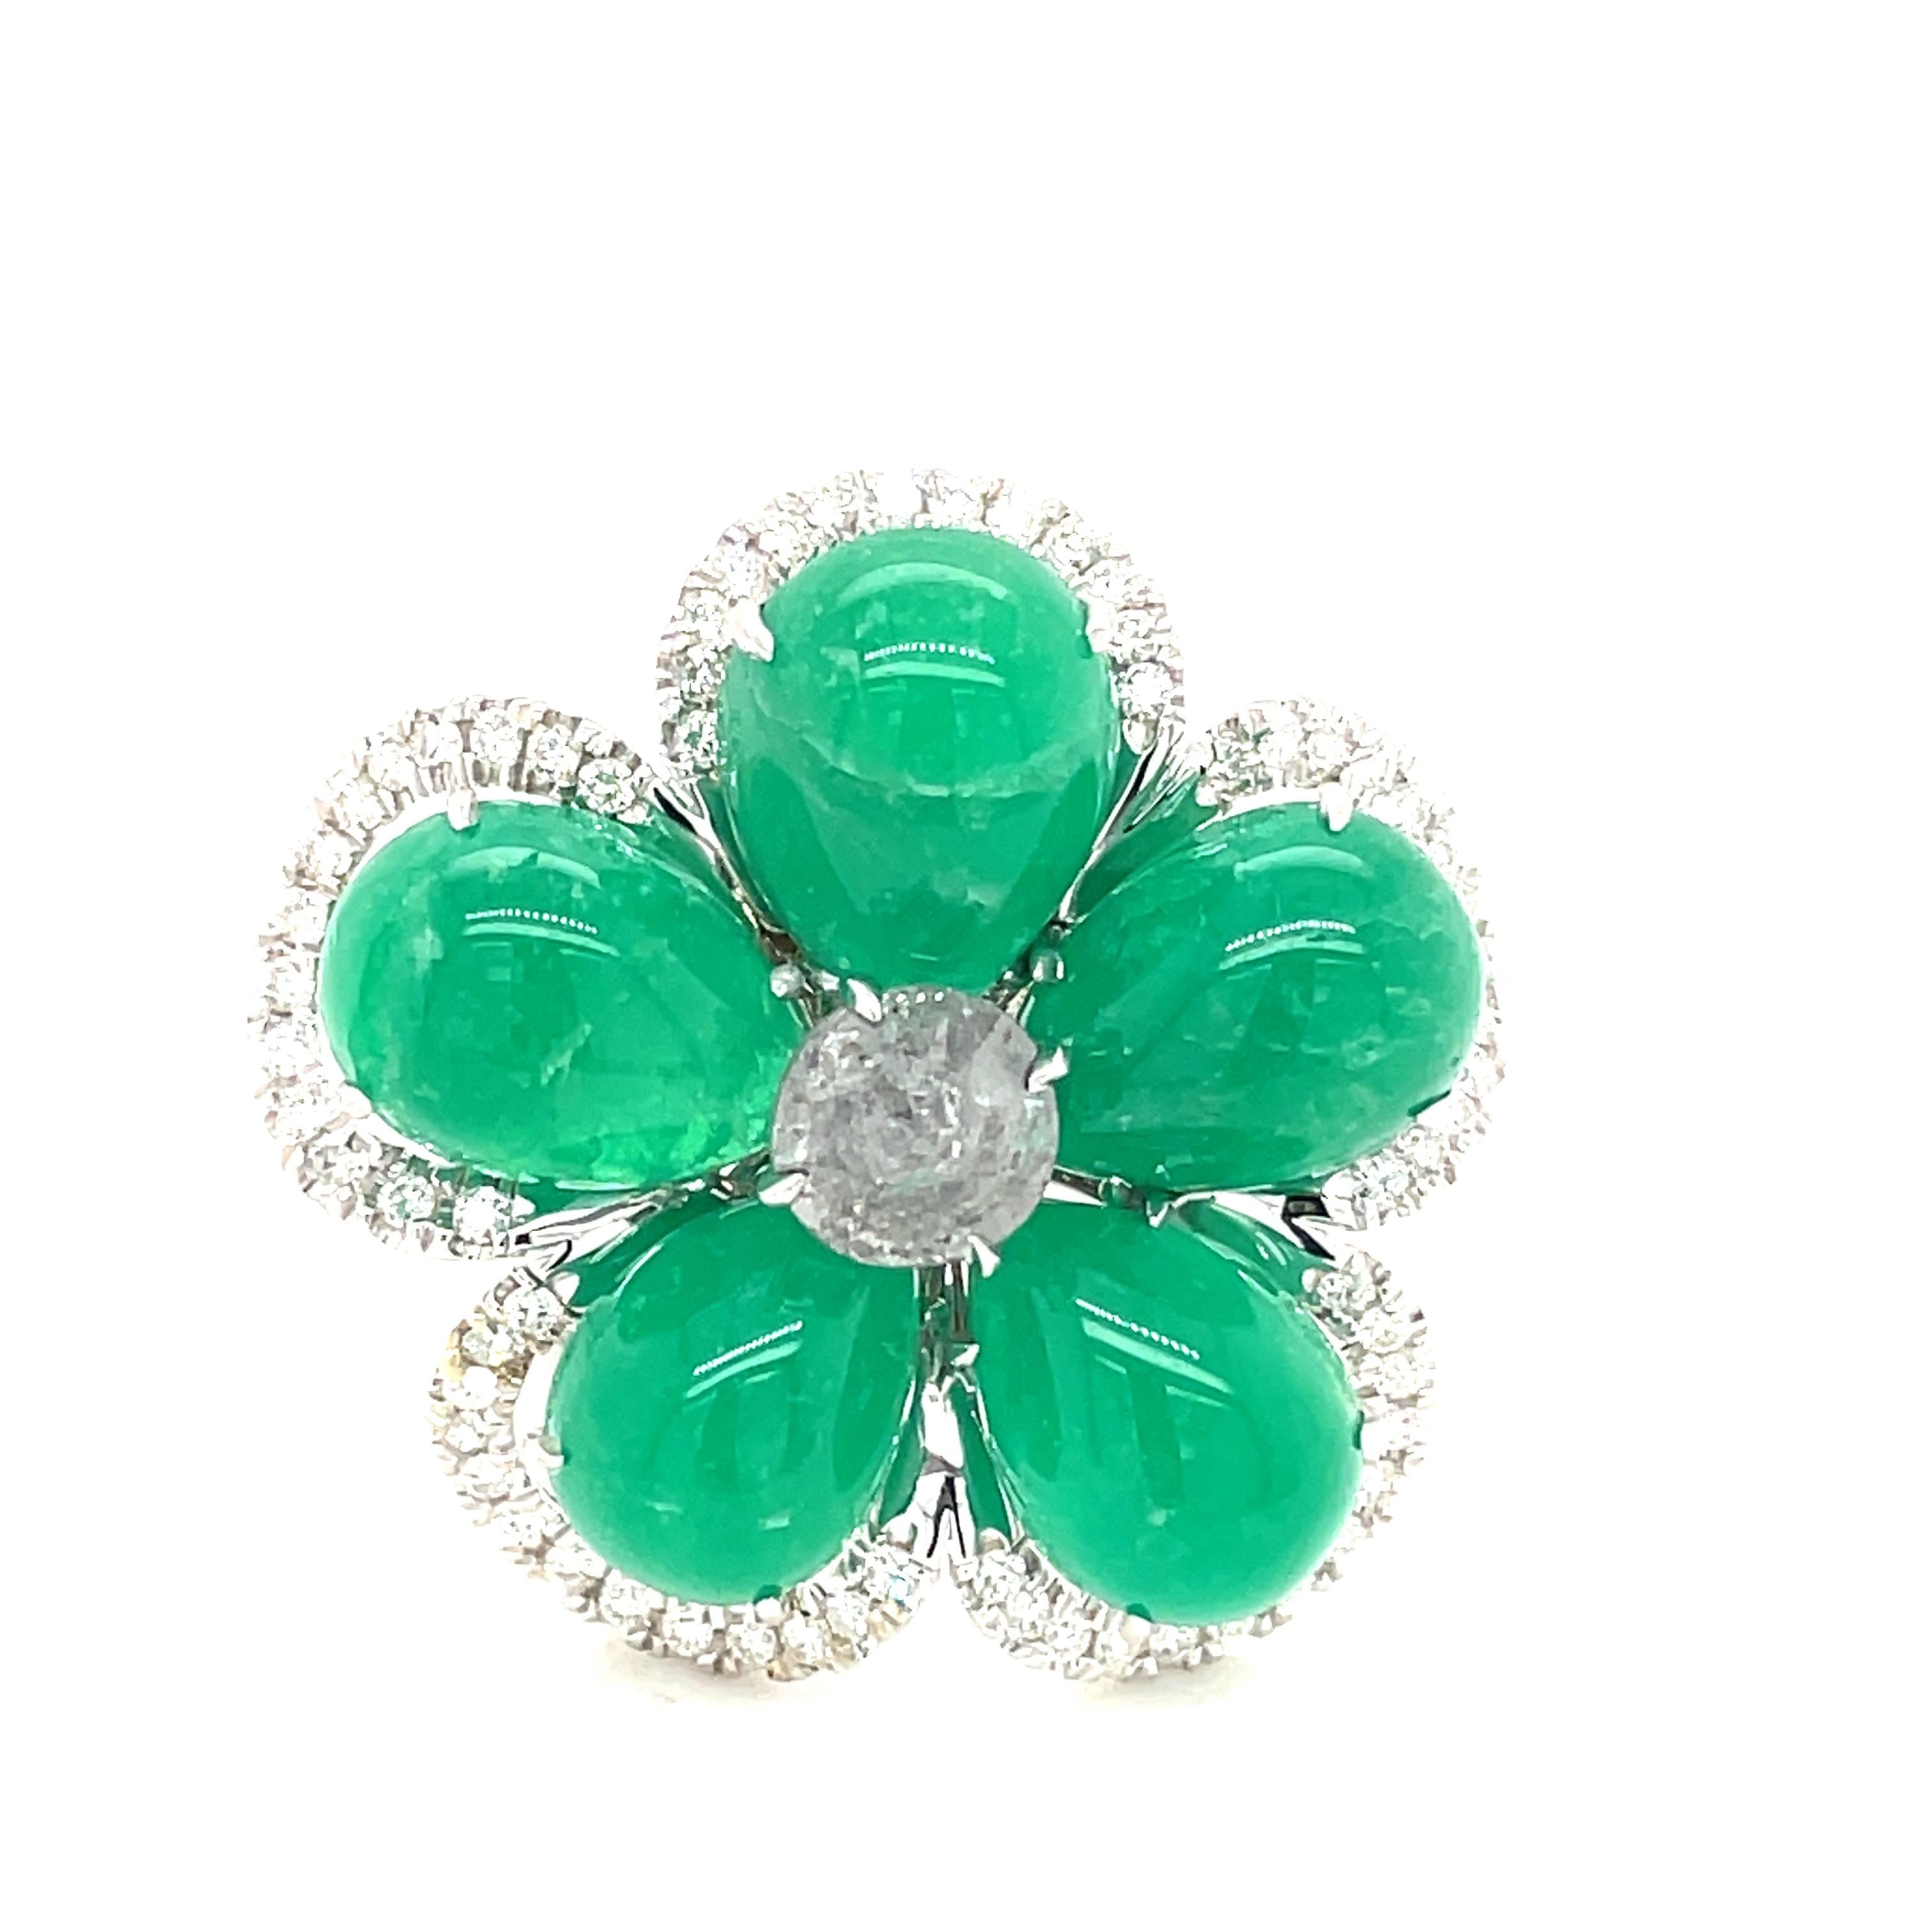 Gorgeous Emerald, Diamond and White Gold Ring.  The emerald cabochons create New York native Nina Runsdorf is known for her wearable, one-of-a-kind jewelry made from precious and semi-precious stones.
Stamped 18K and NR.
1 inch width at the widest